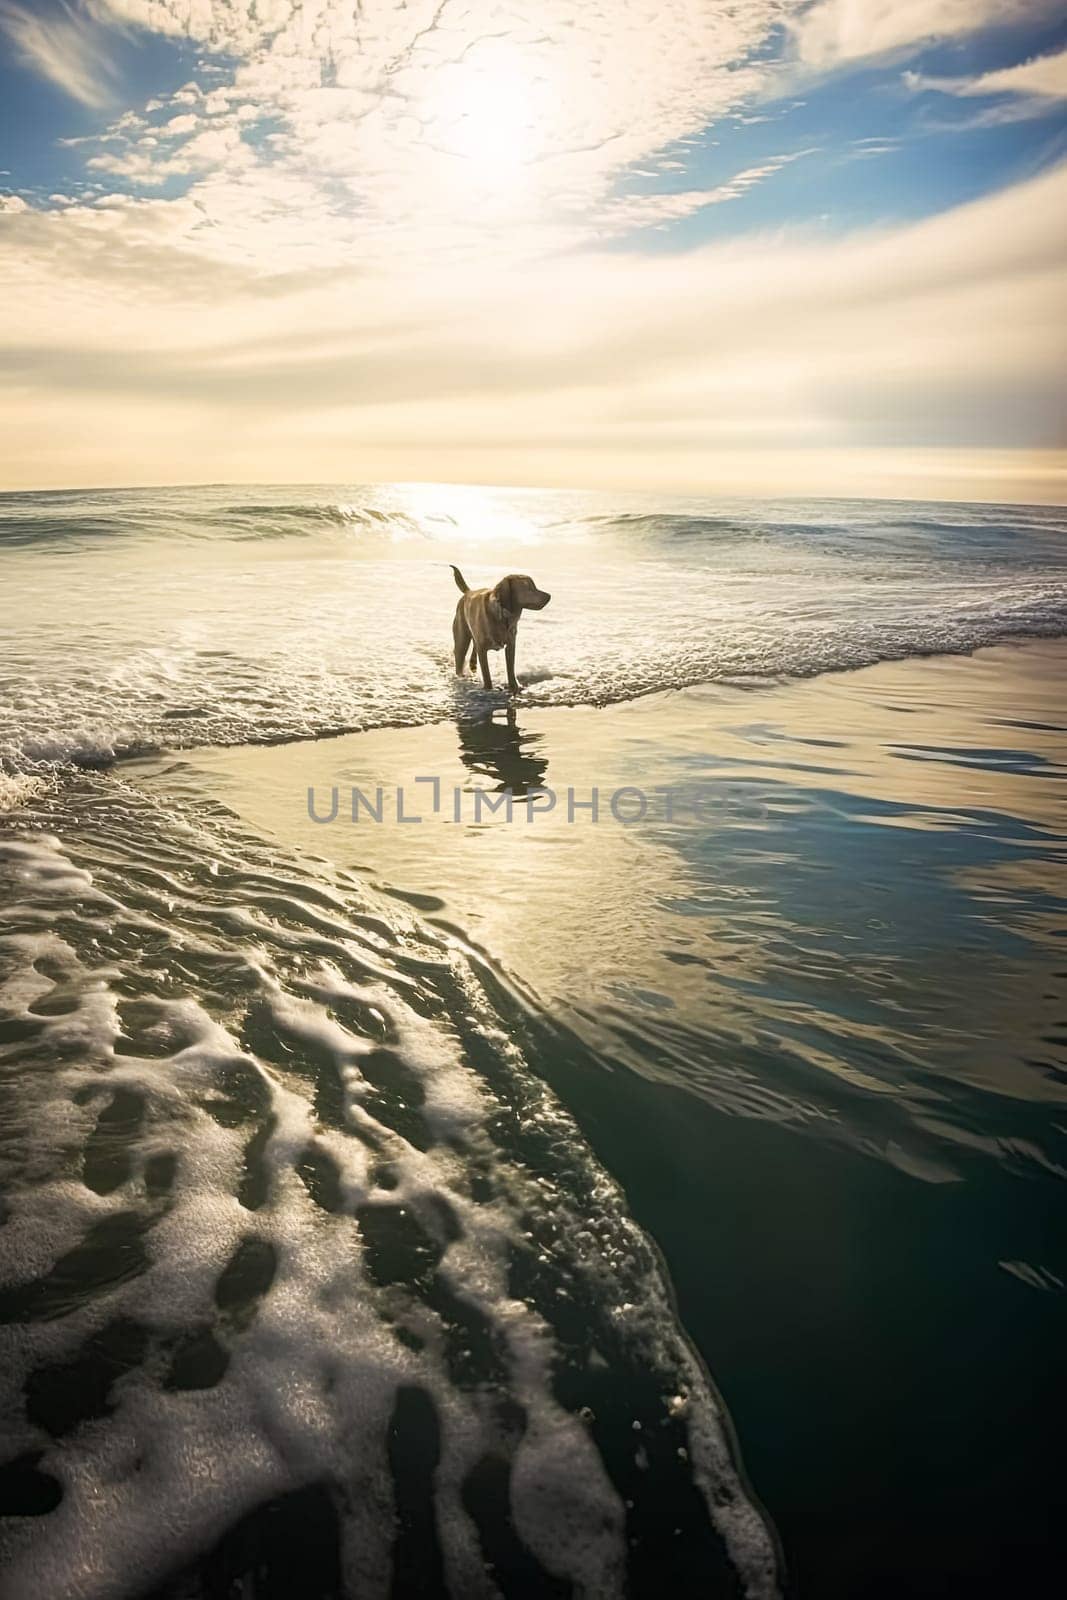 A dog is sitting on a surfboard with a blue collar. The dog is looking at the camera